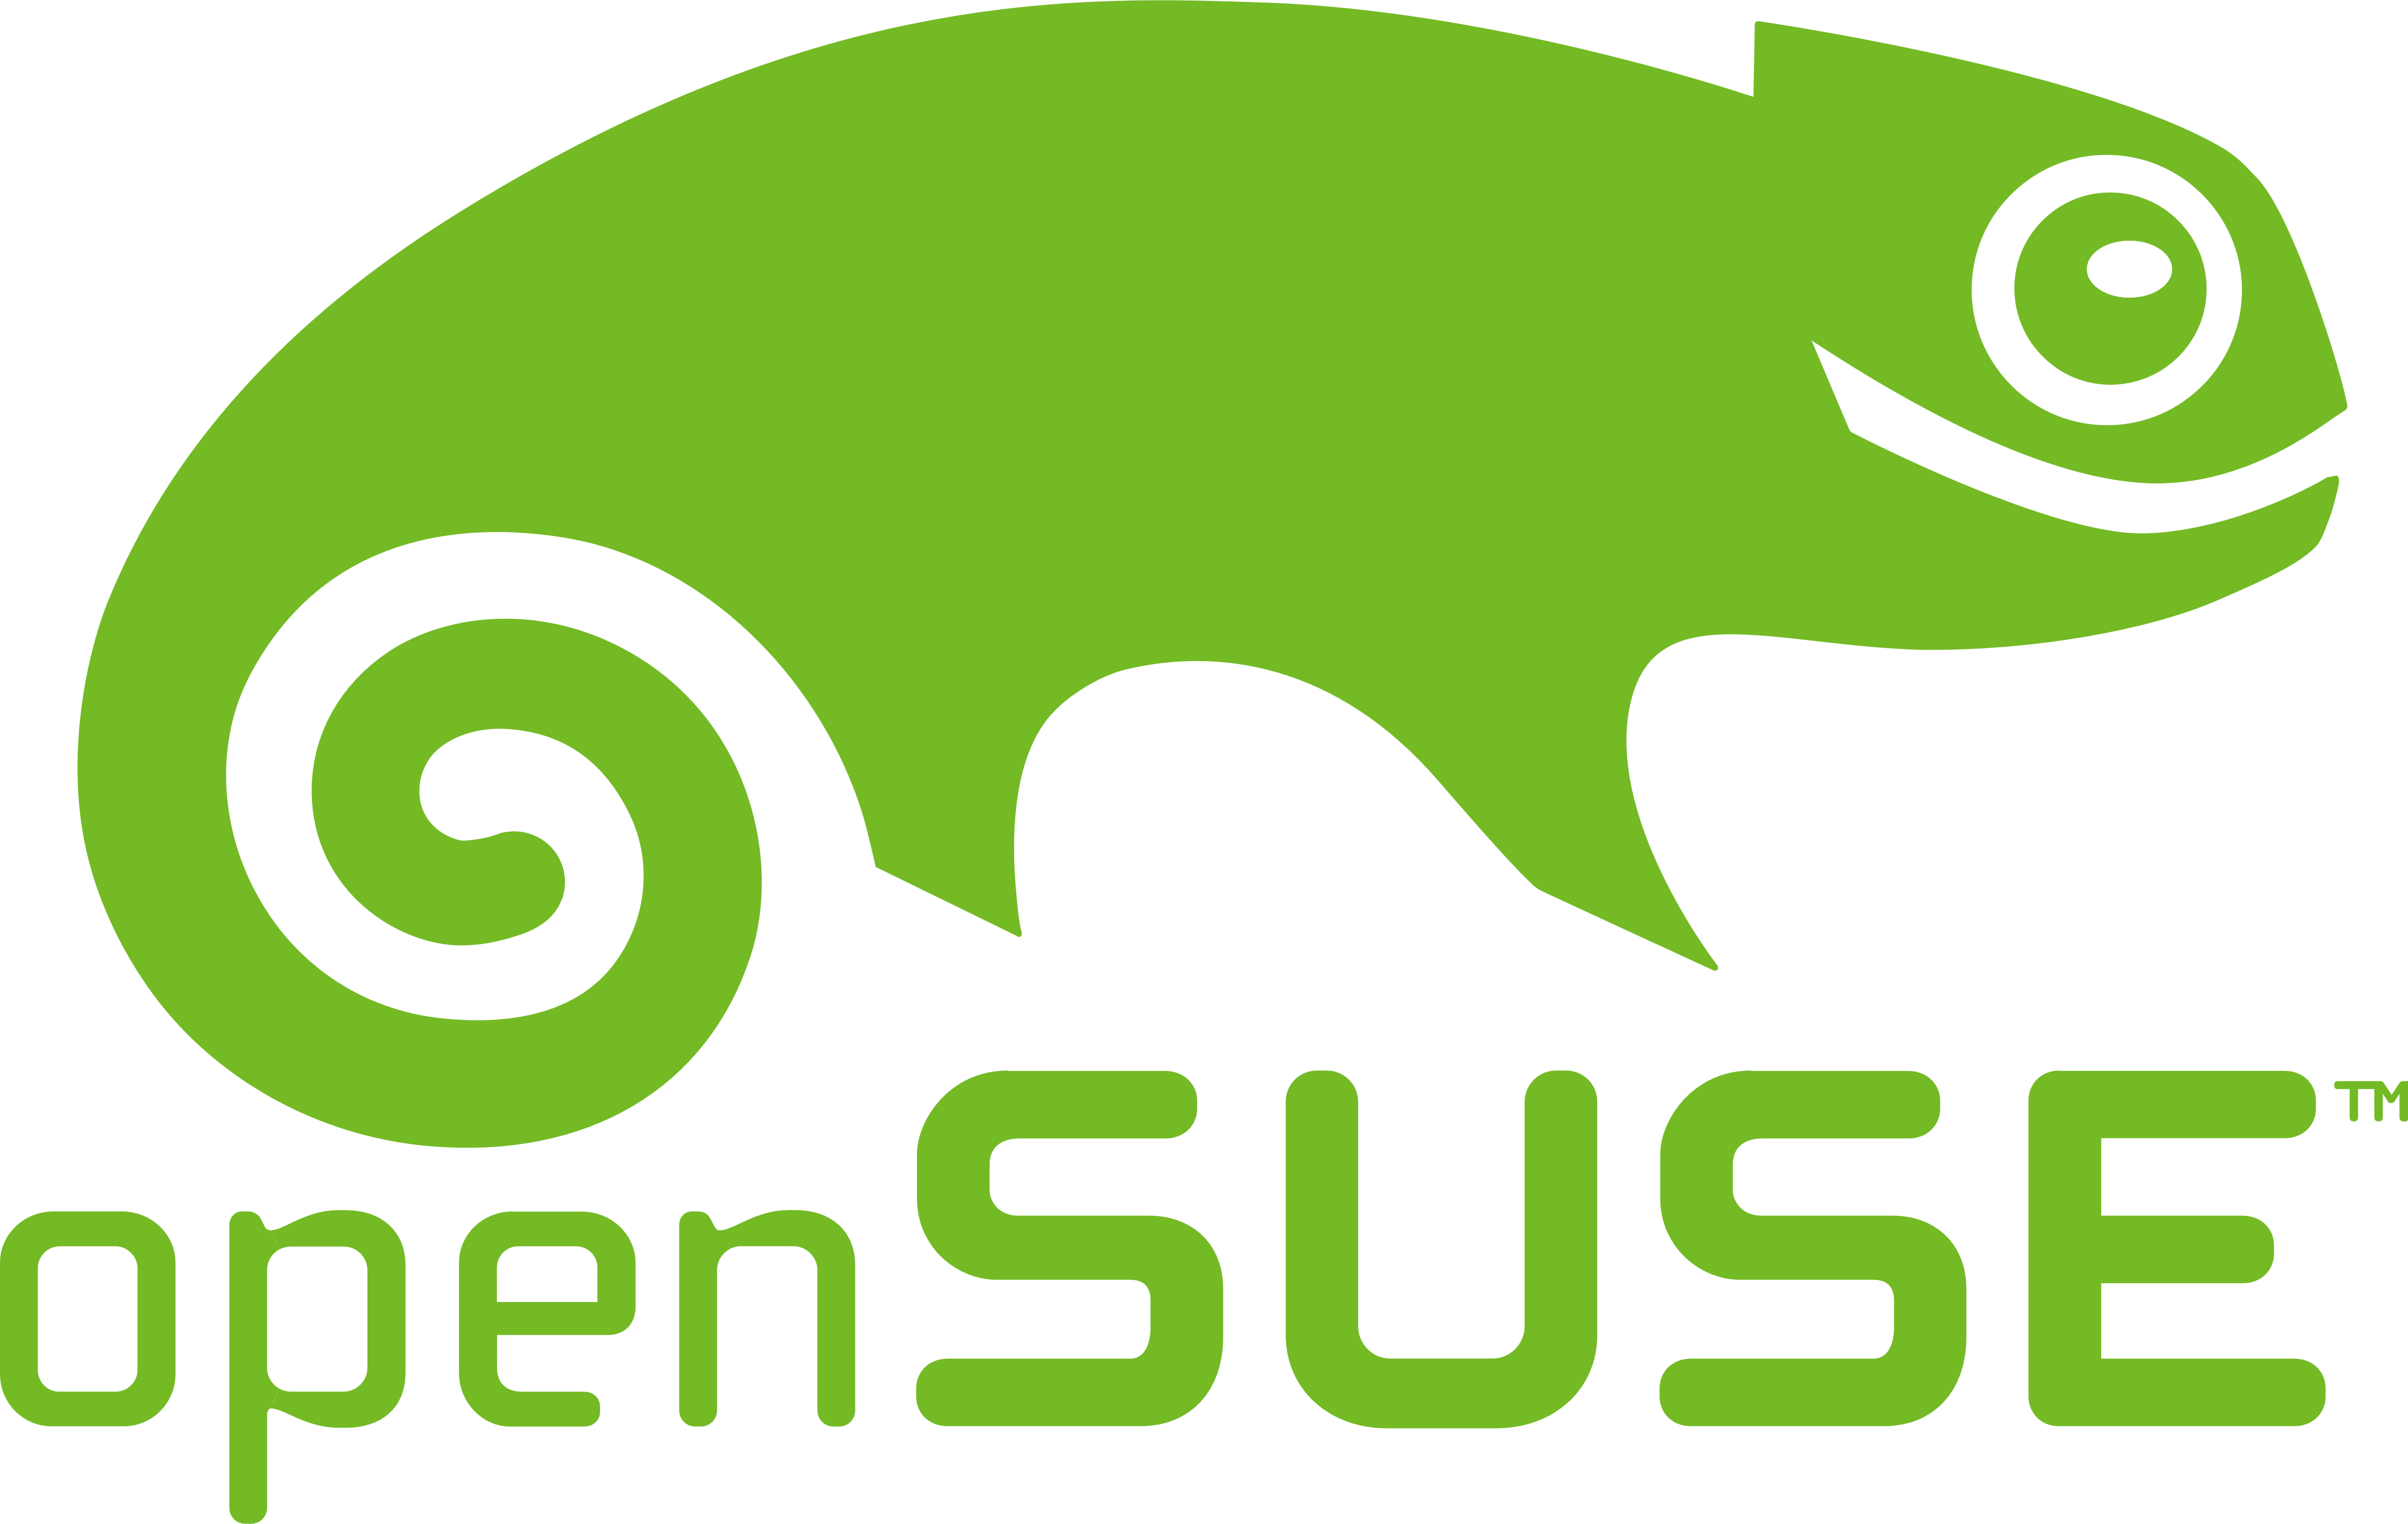 Join Us To Find Out About The Latest Technical Developments, - Open Suse (5000x3165)